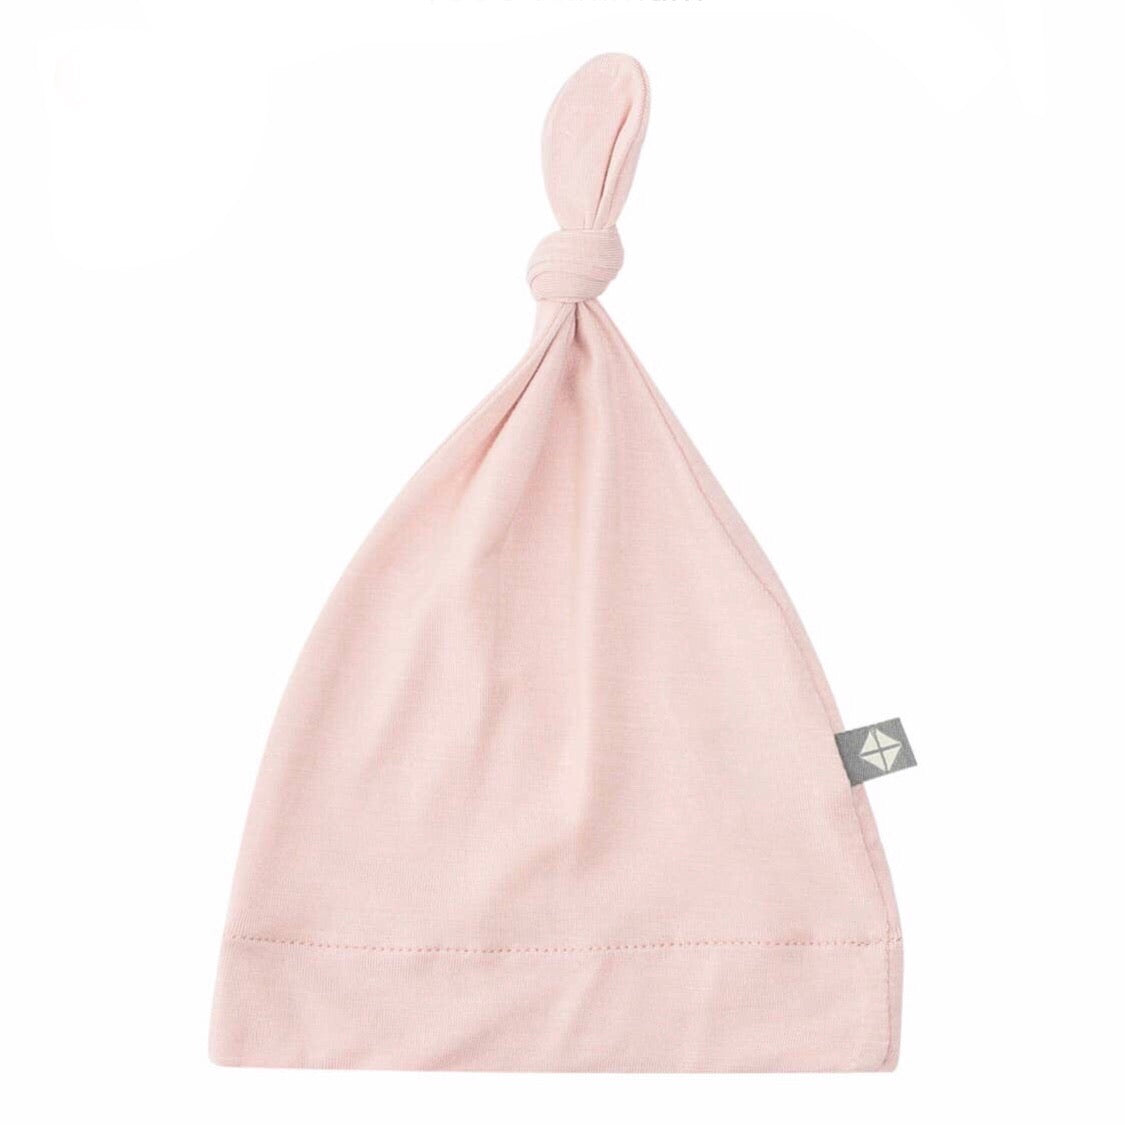 Knotted Baby Cap - Blush